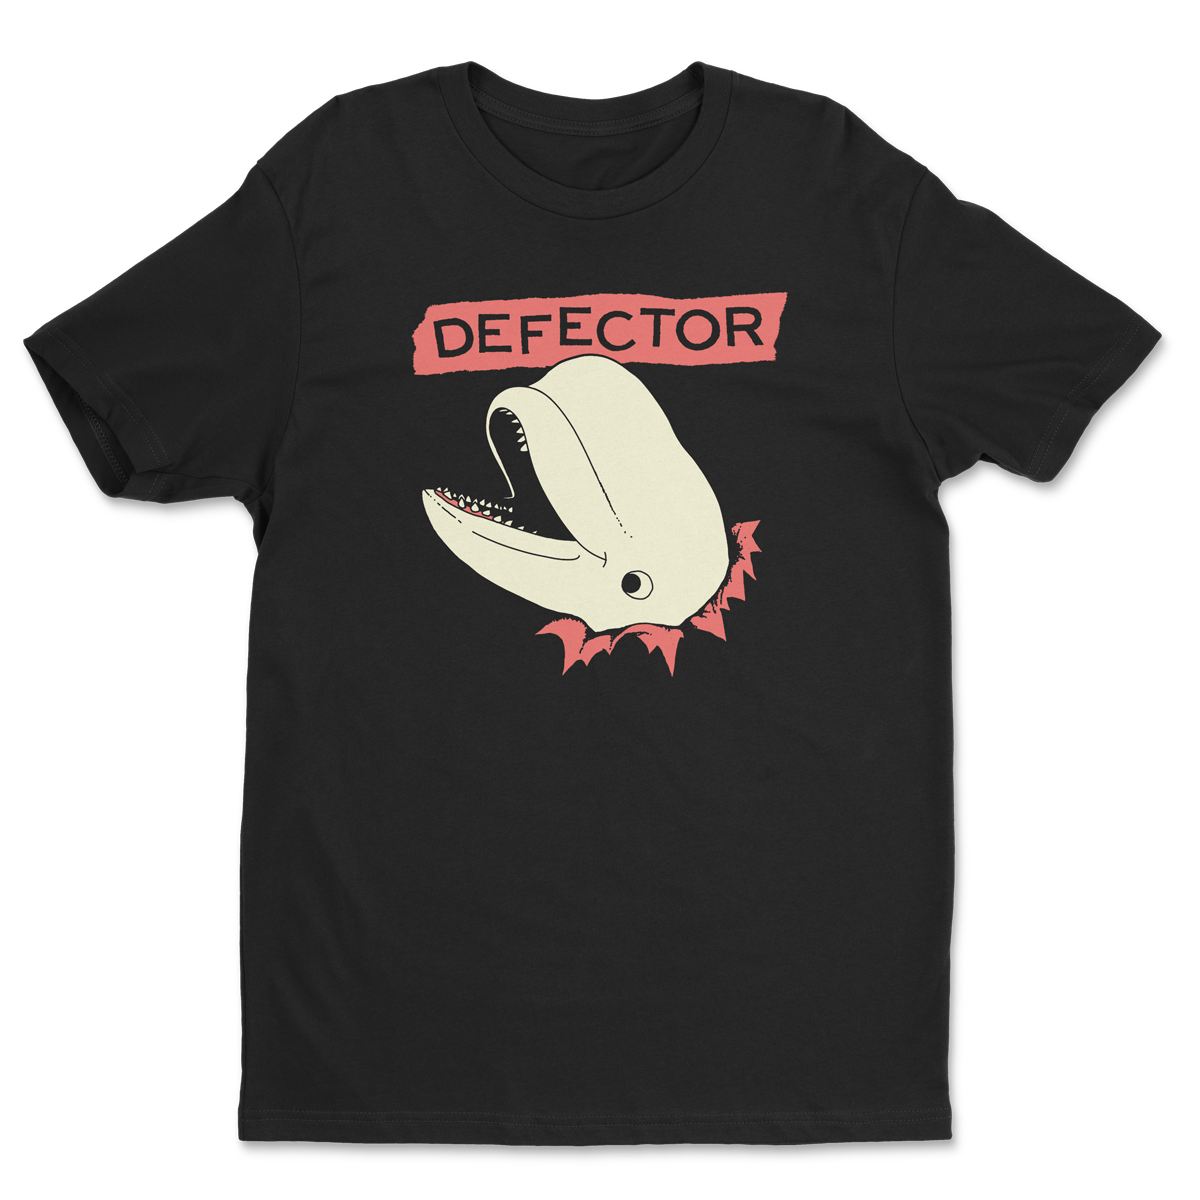 Whale bursting through black t-shirt with Defector logo above it